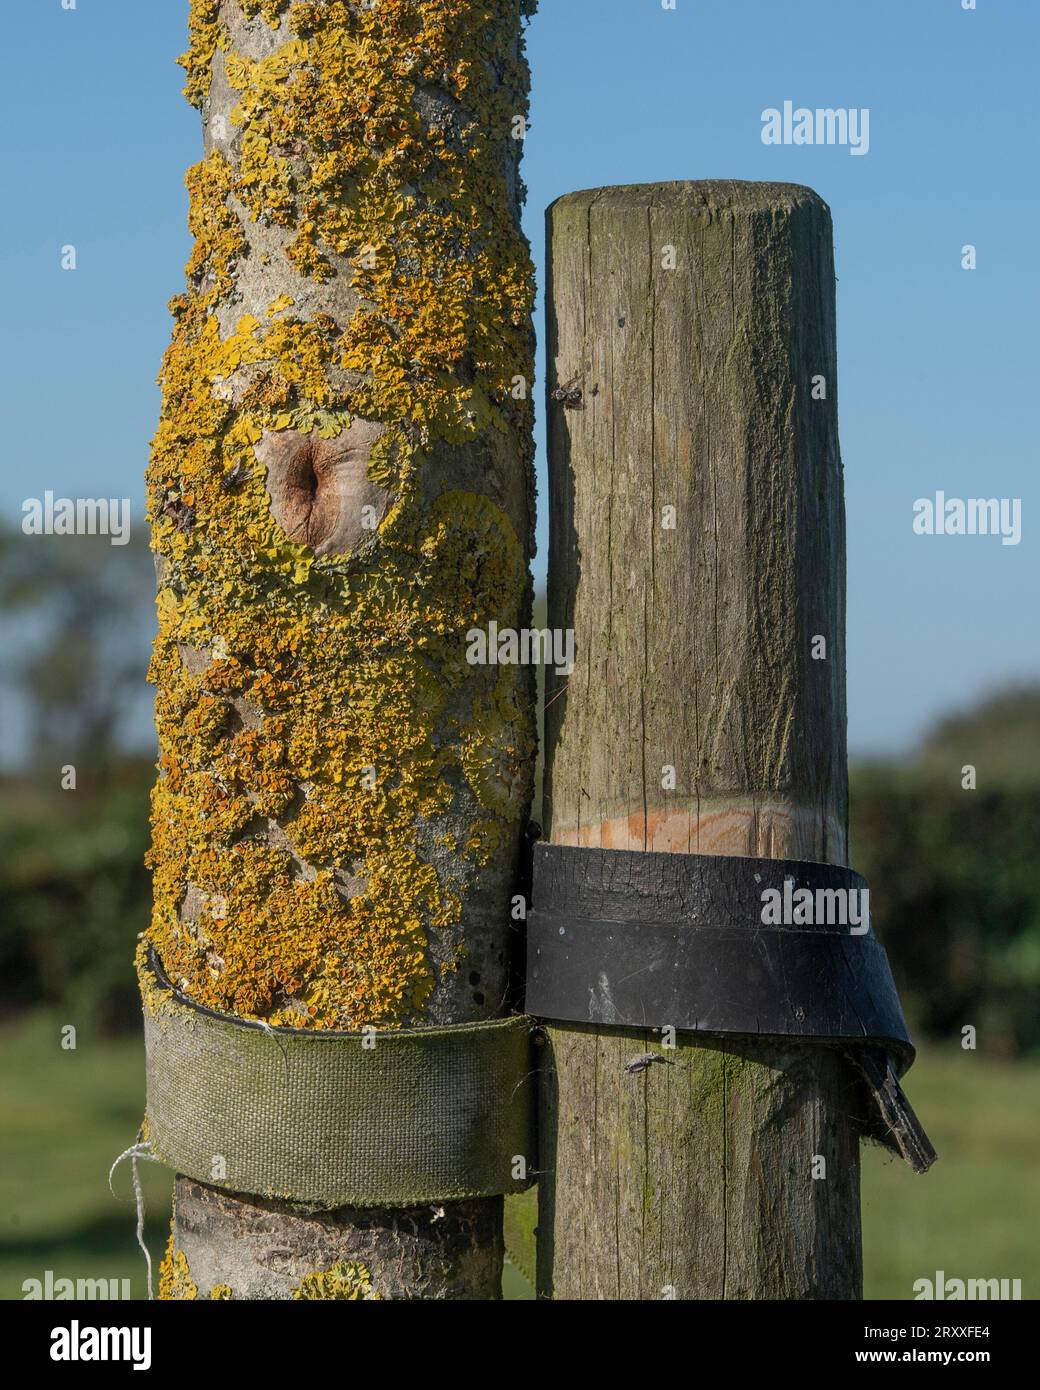 ash tree and tie strap close up showing lichen Stock Photo